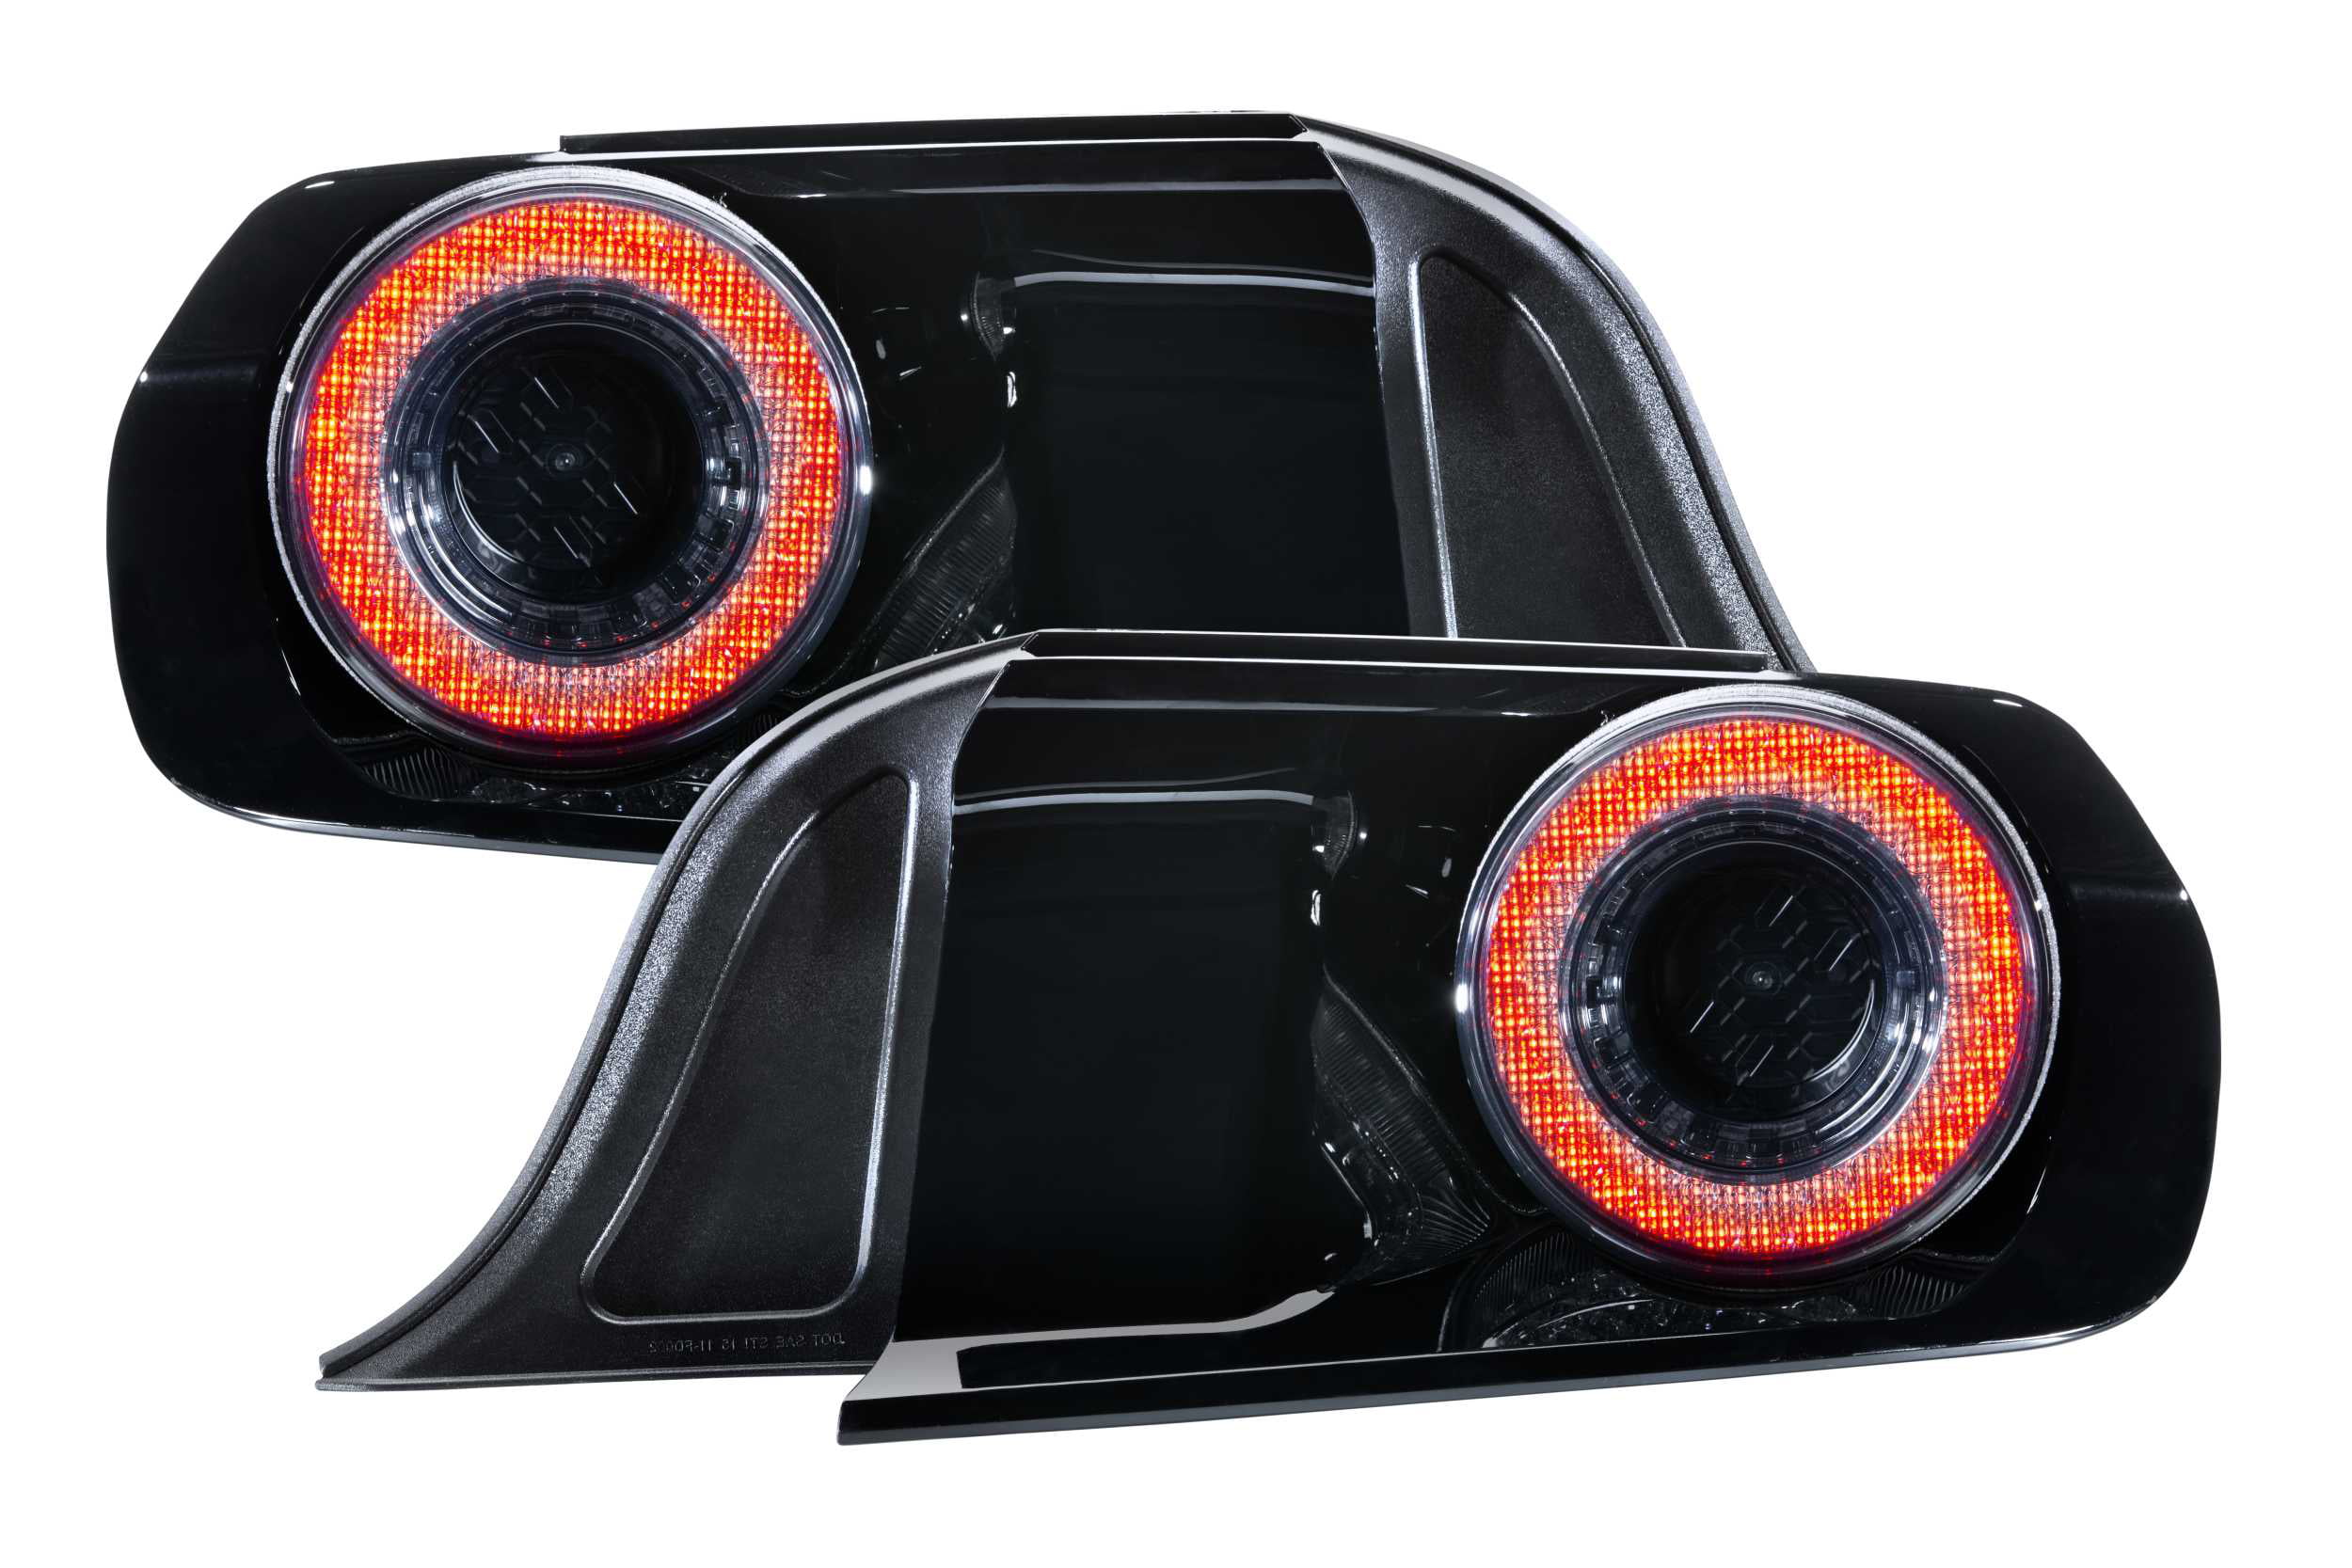 Morimoto 2015-2021 Fits Lights LF413 Smoked Ford Tail XB Mustang Pair Led